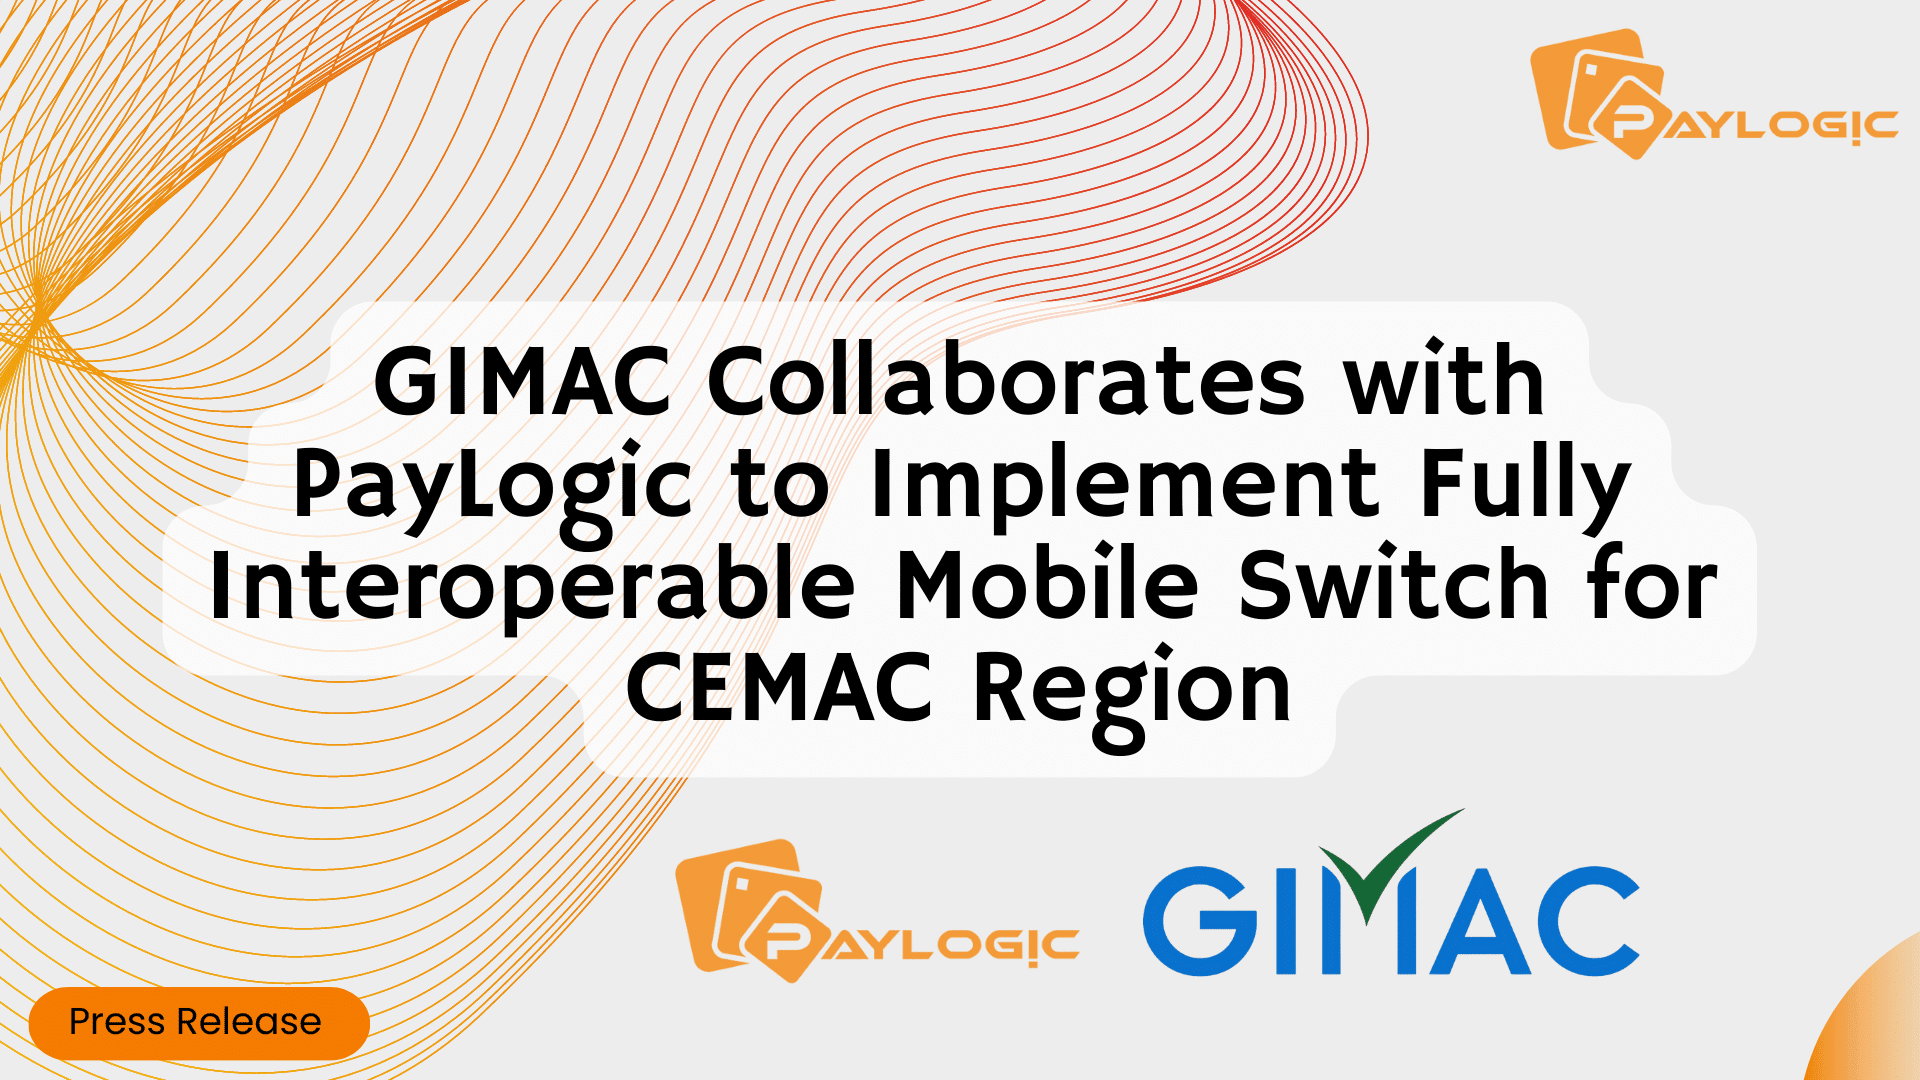 GIMAC Collaborates with PayLogic to Implement Fully Interoperable Mobile Switch for CEMAC Region